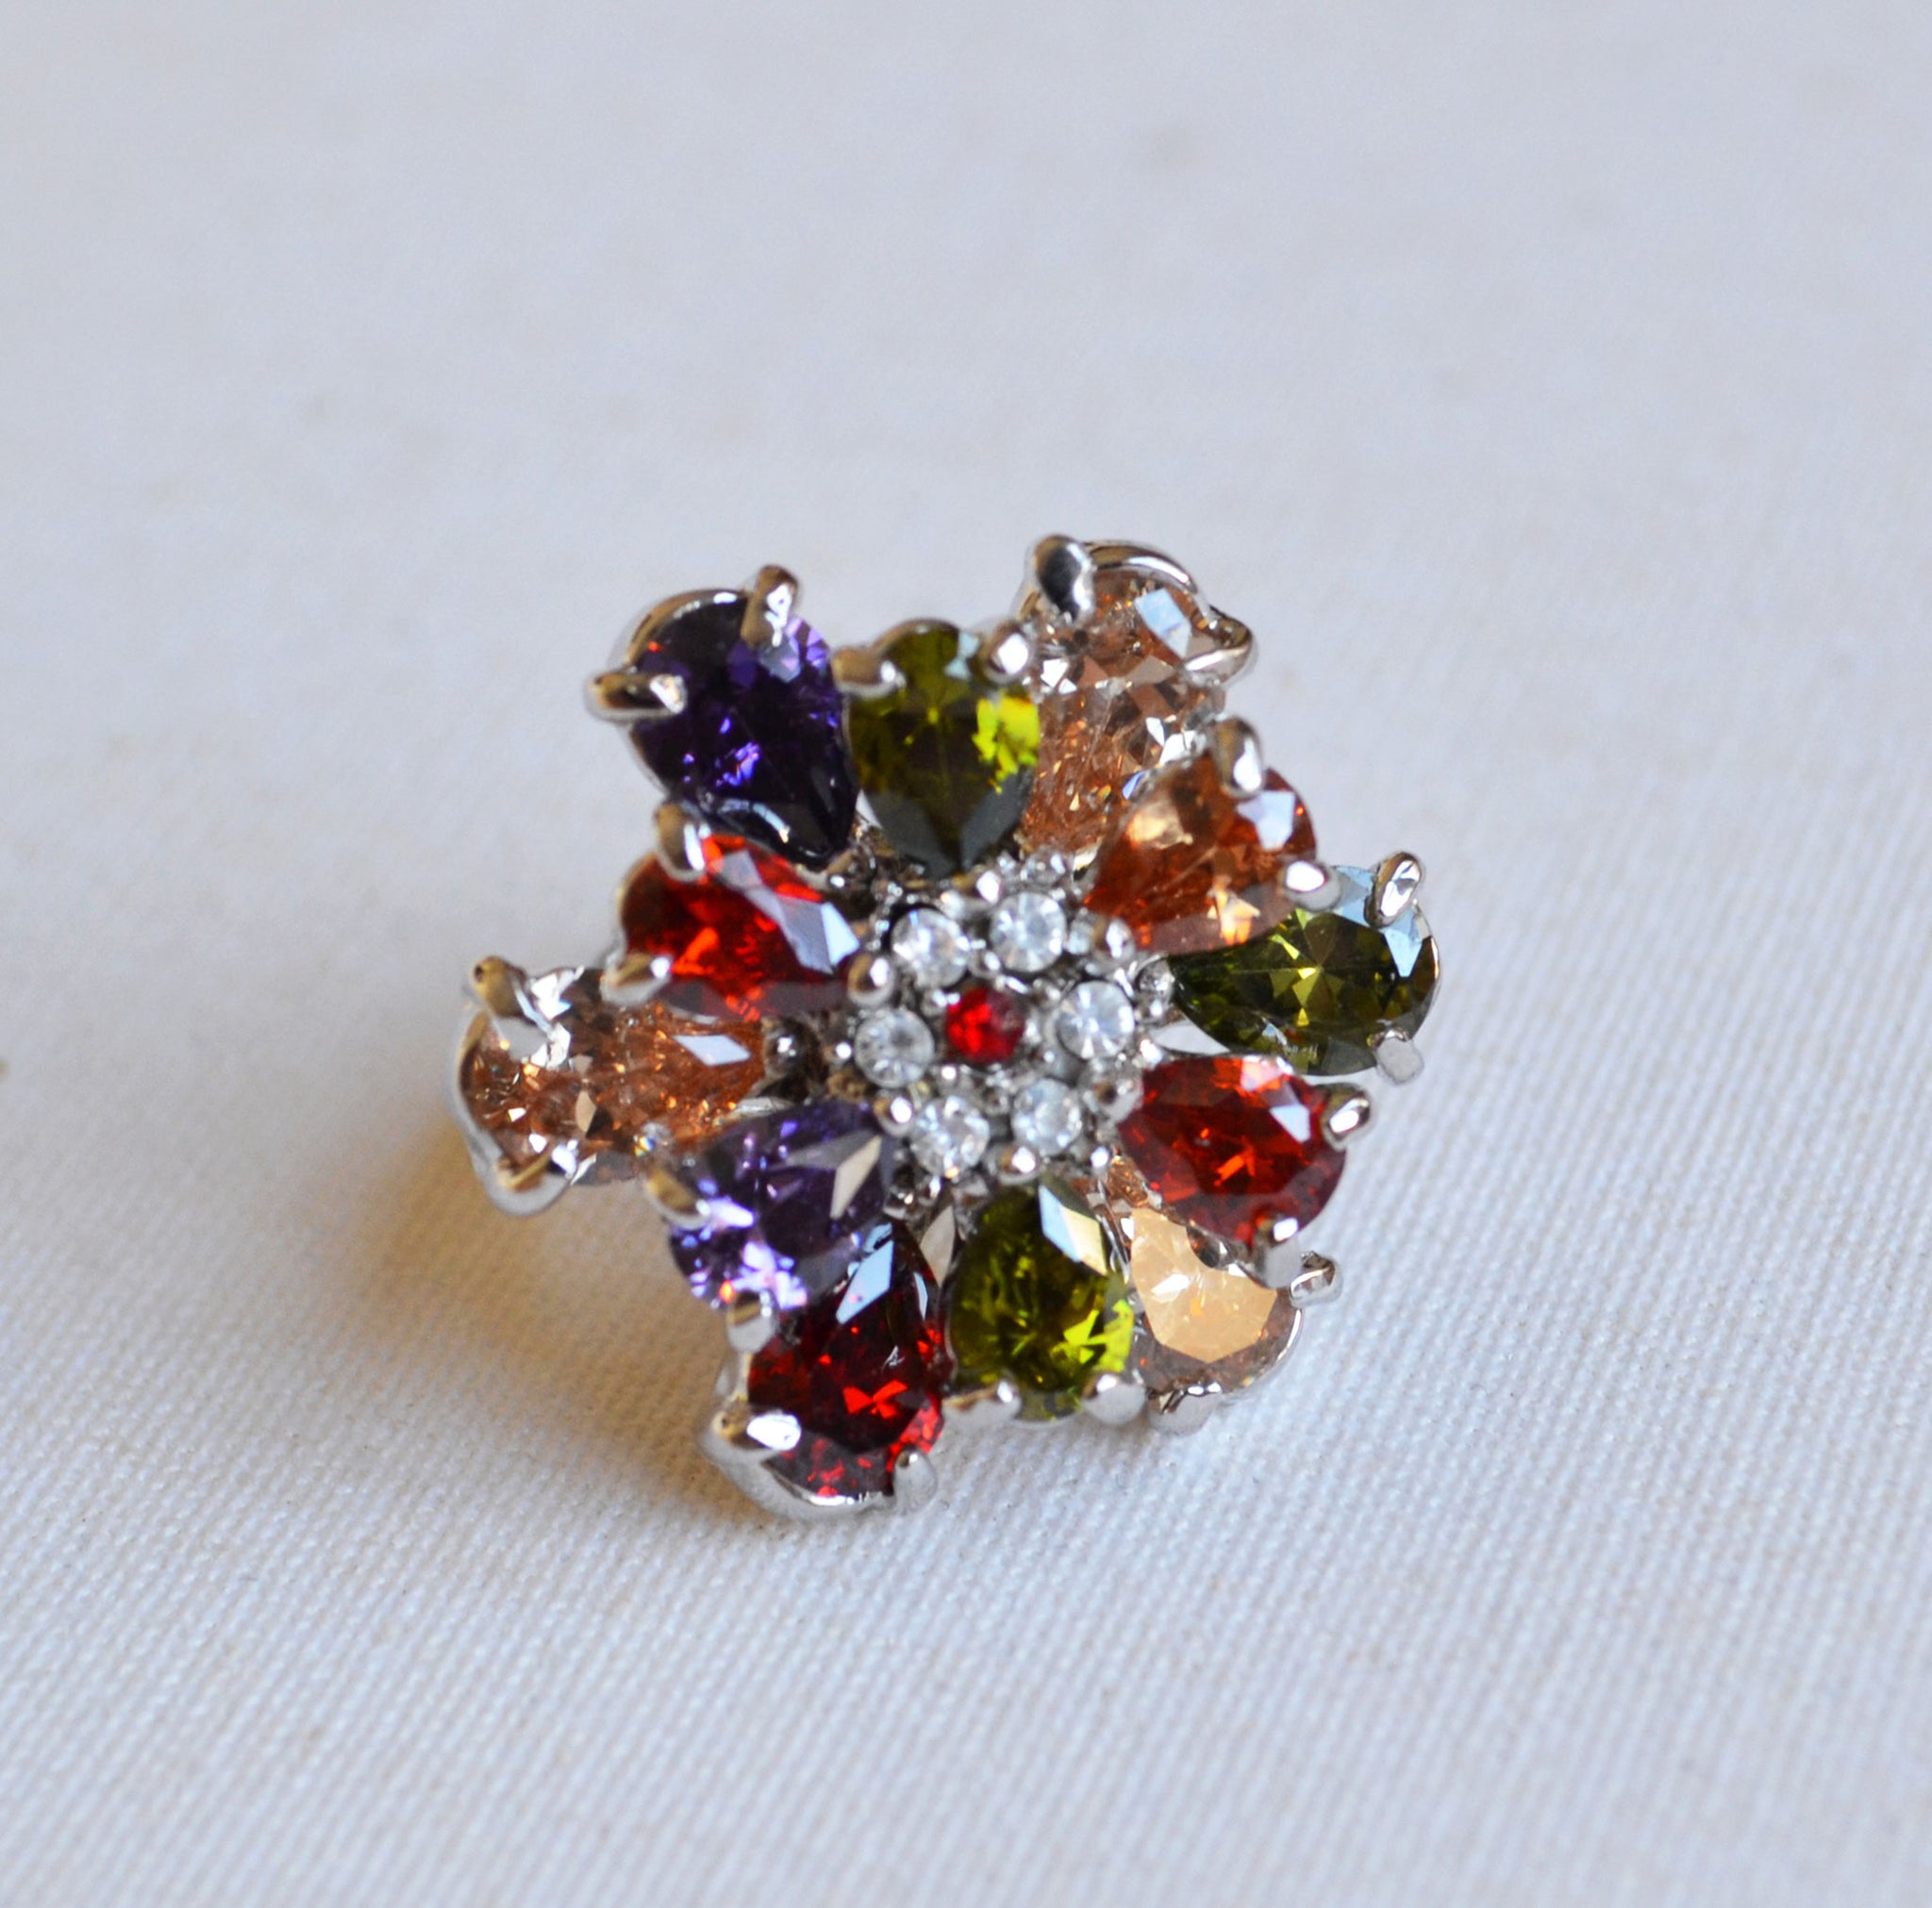 Rhinestone Flower Cocktail Ring - One Size 6.5